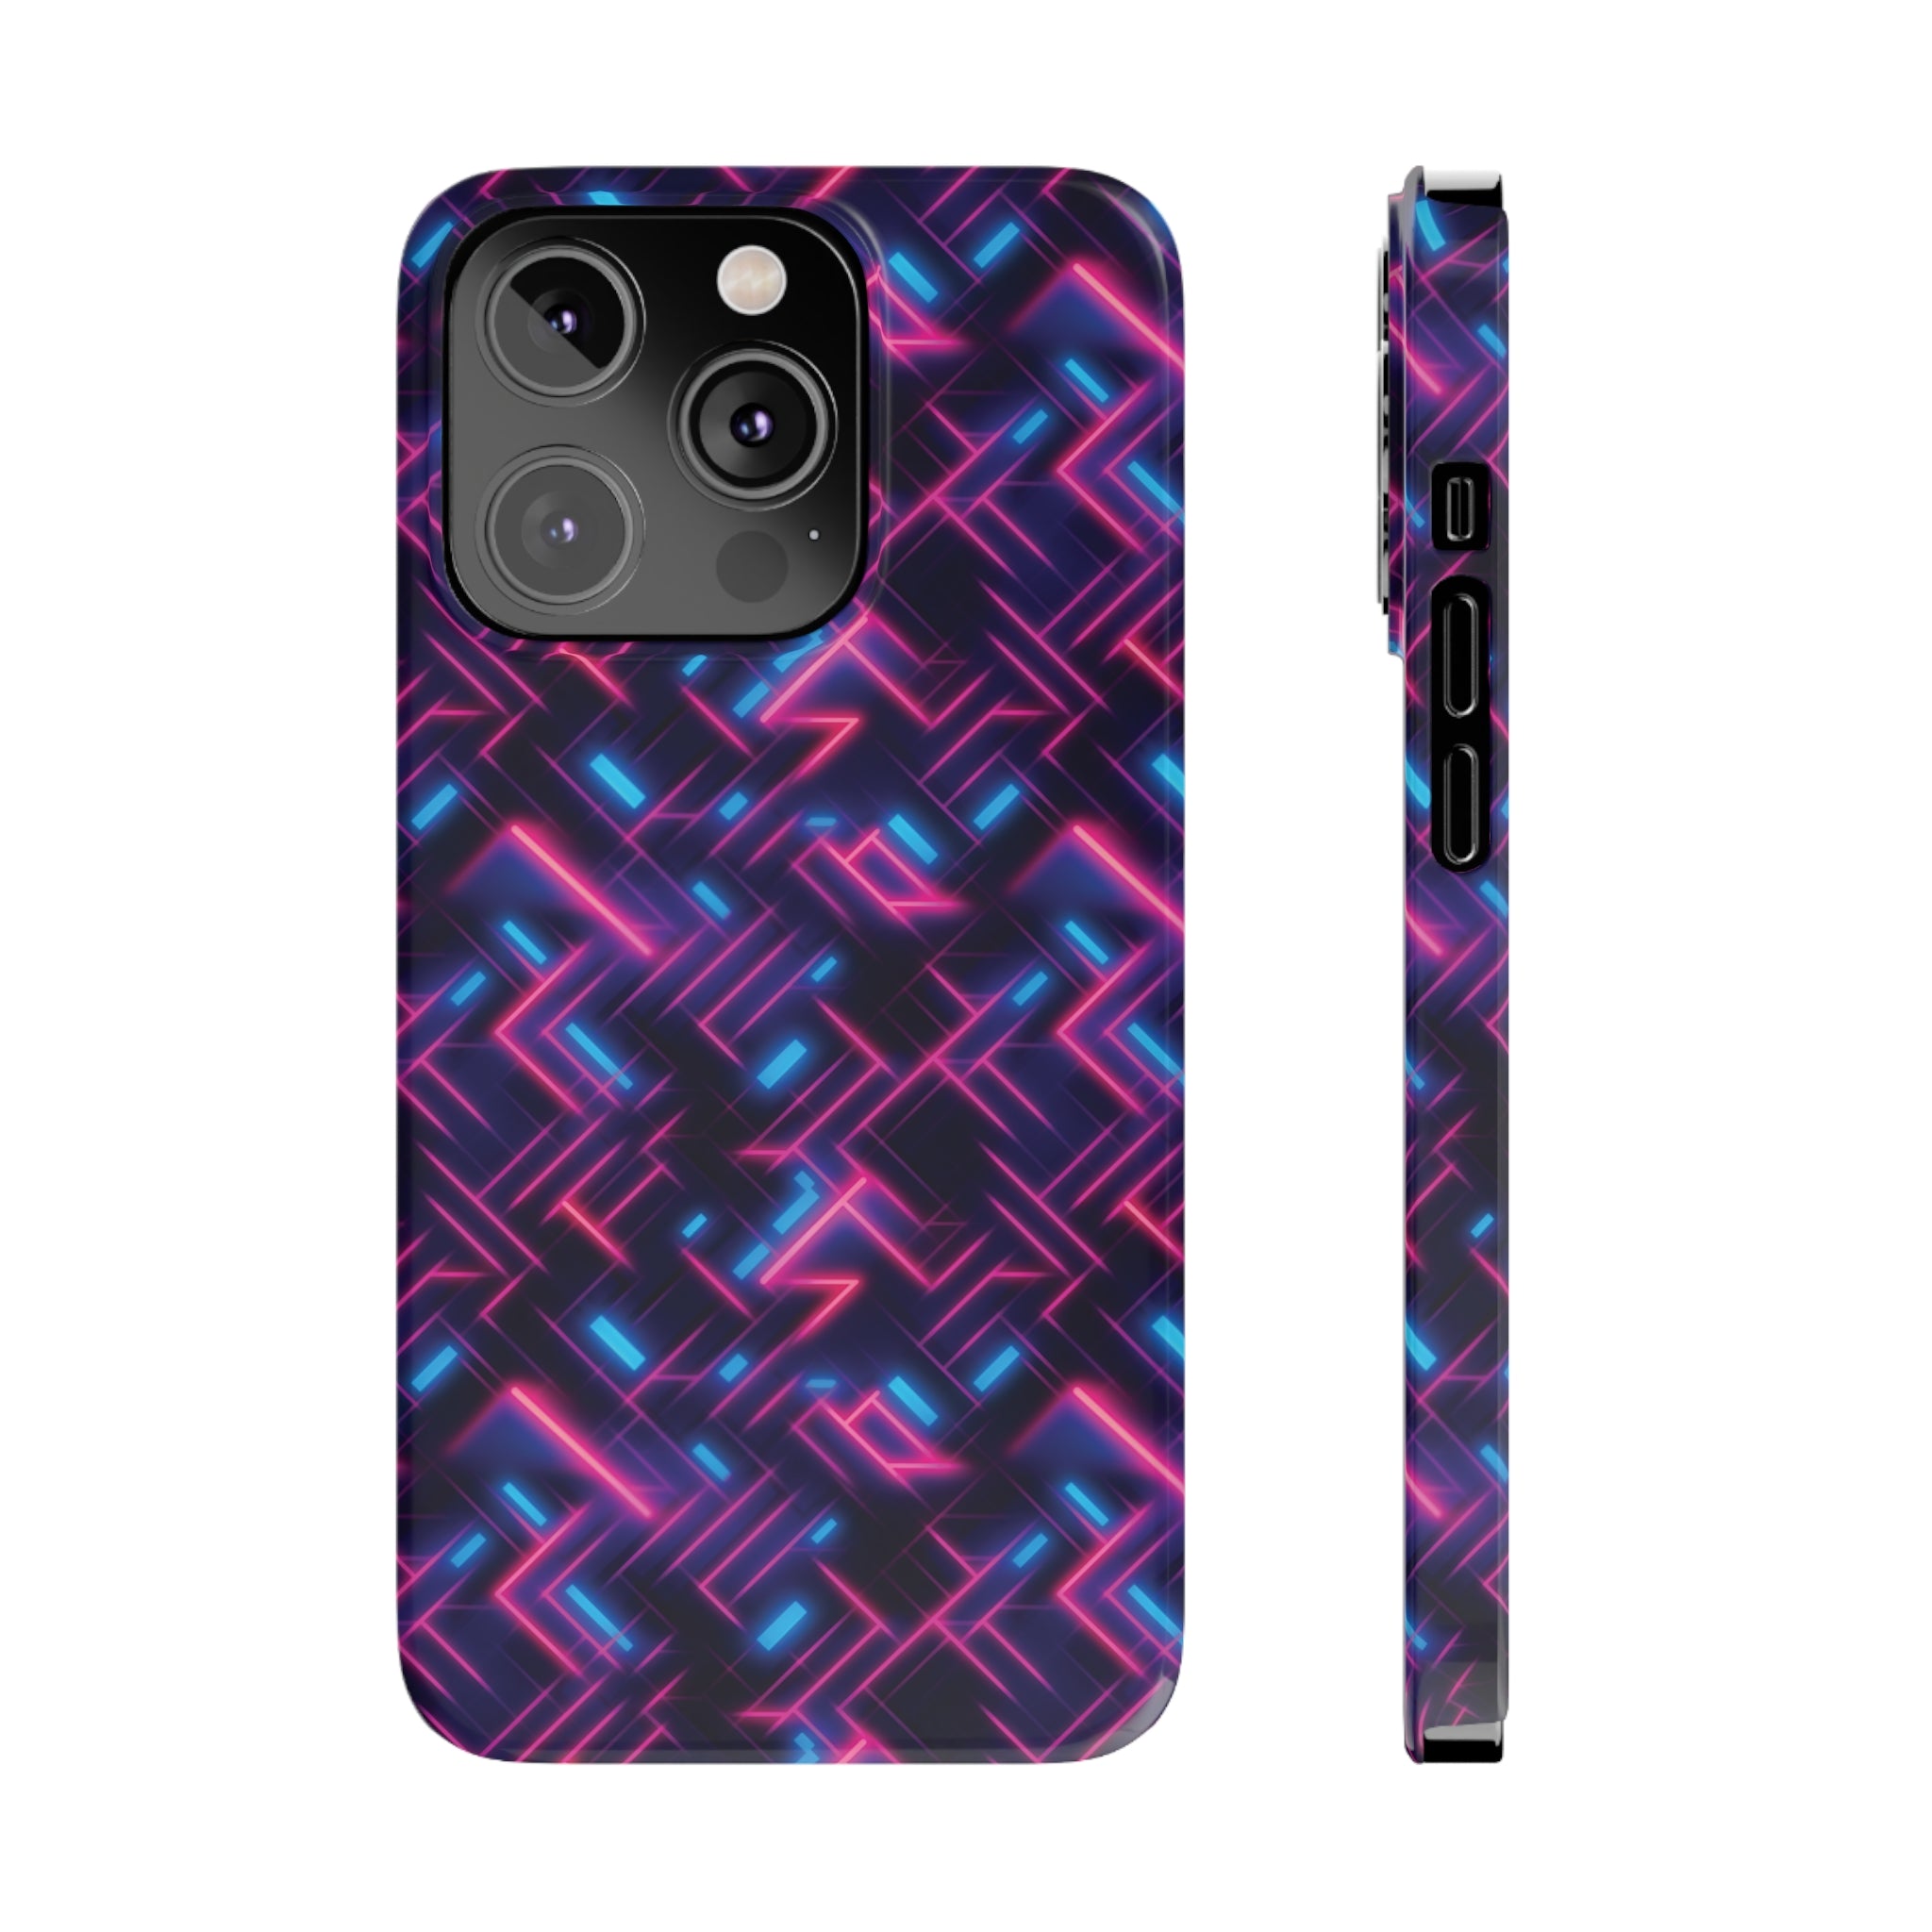 Slim Phone Cases (AOP) - Seamless Synthwave Designs 02